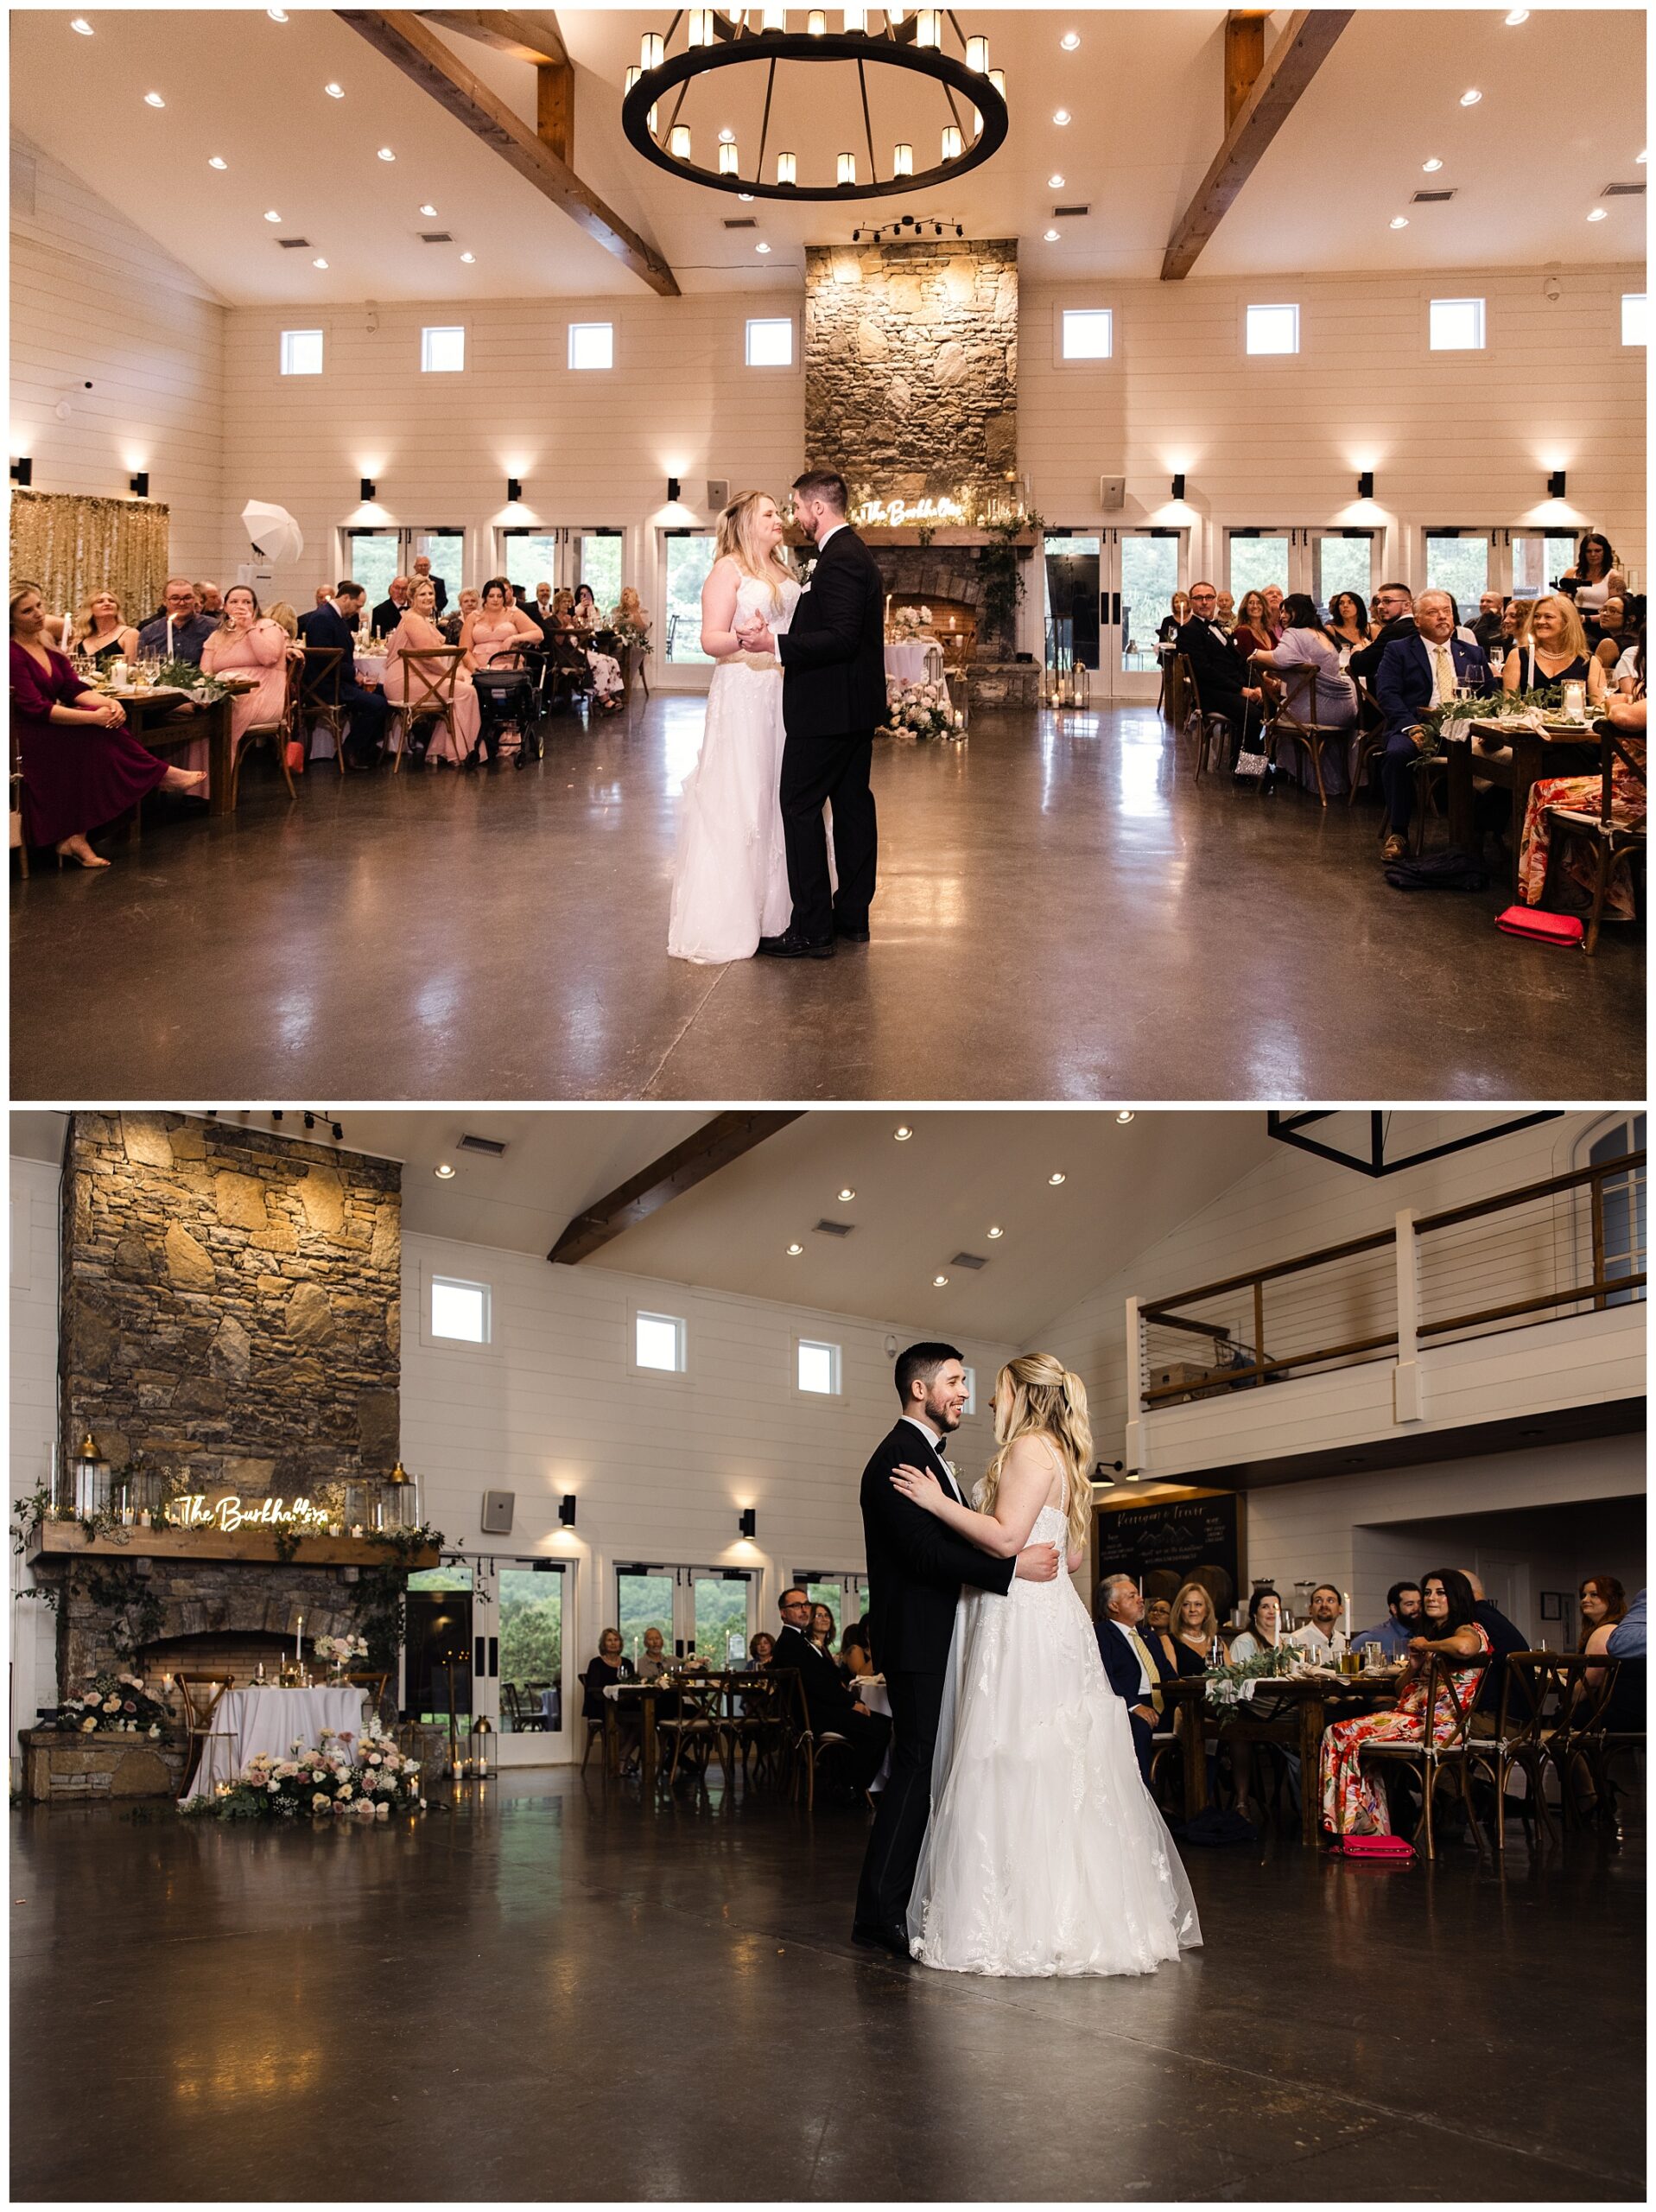 Bride and groom sharing a first dance in a hall filled with seated guests at Chestnut Ridge, under a large circular chandelier and in front of a stone fireplace.